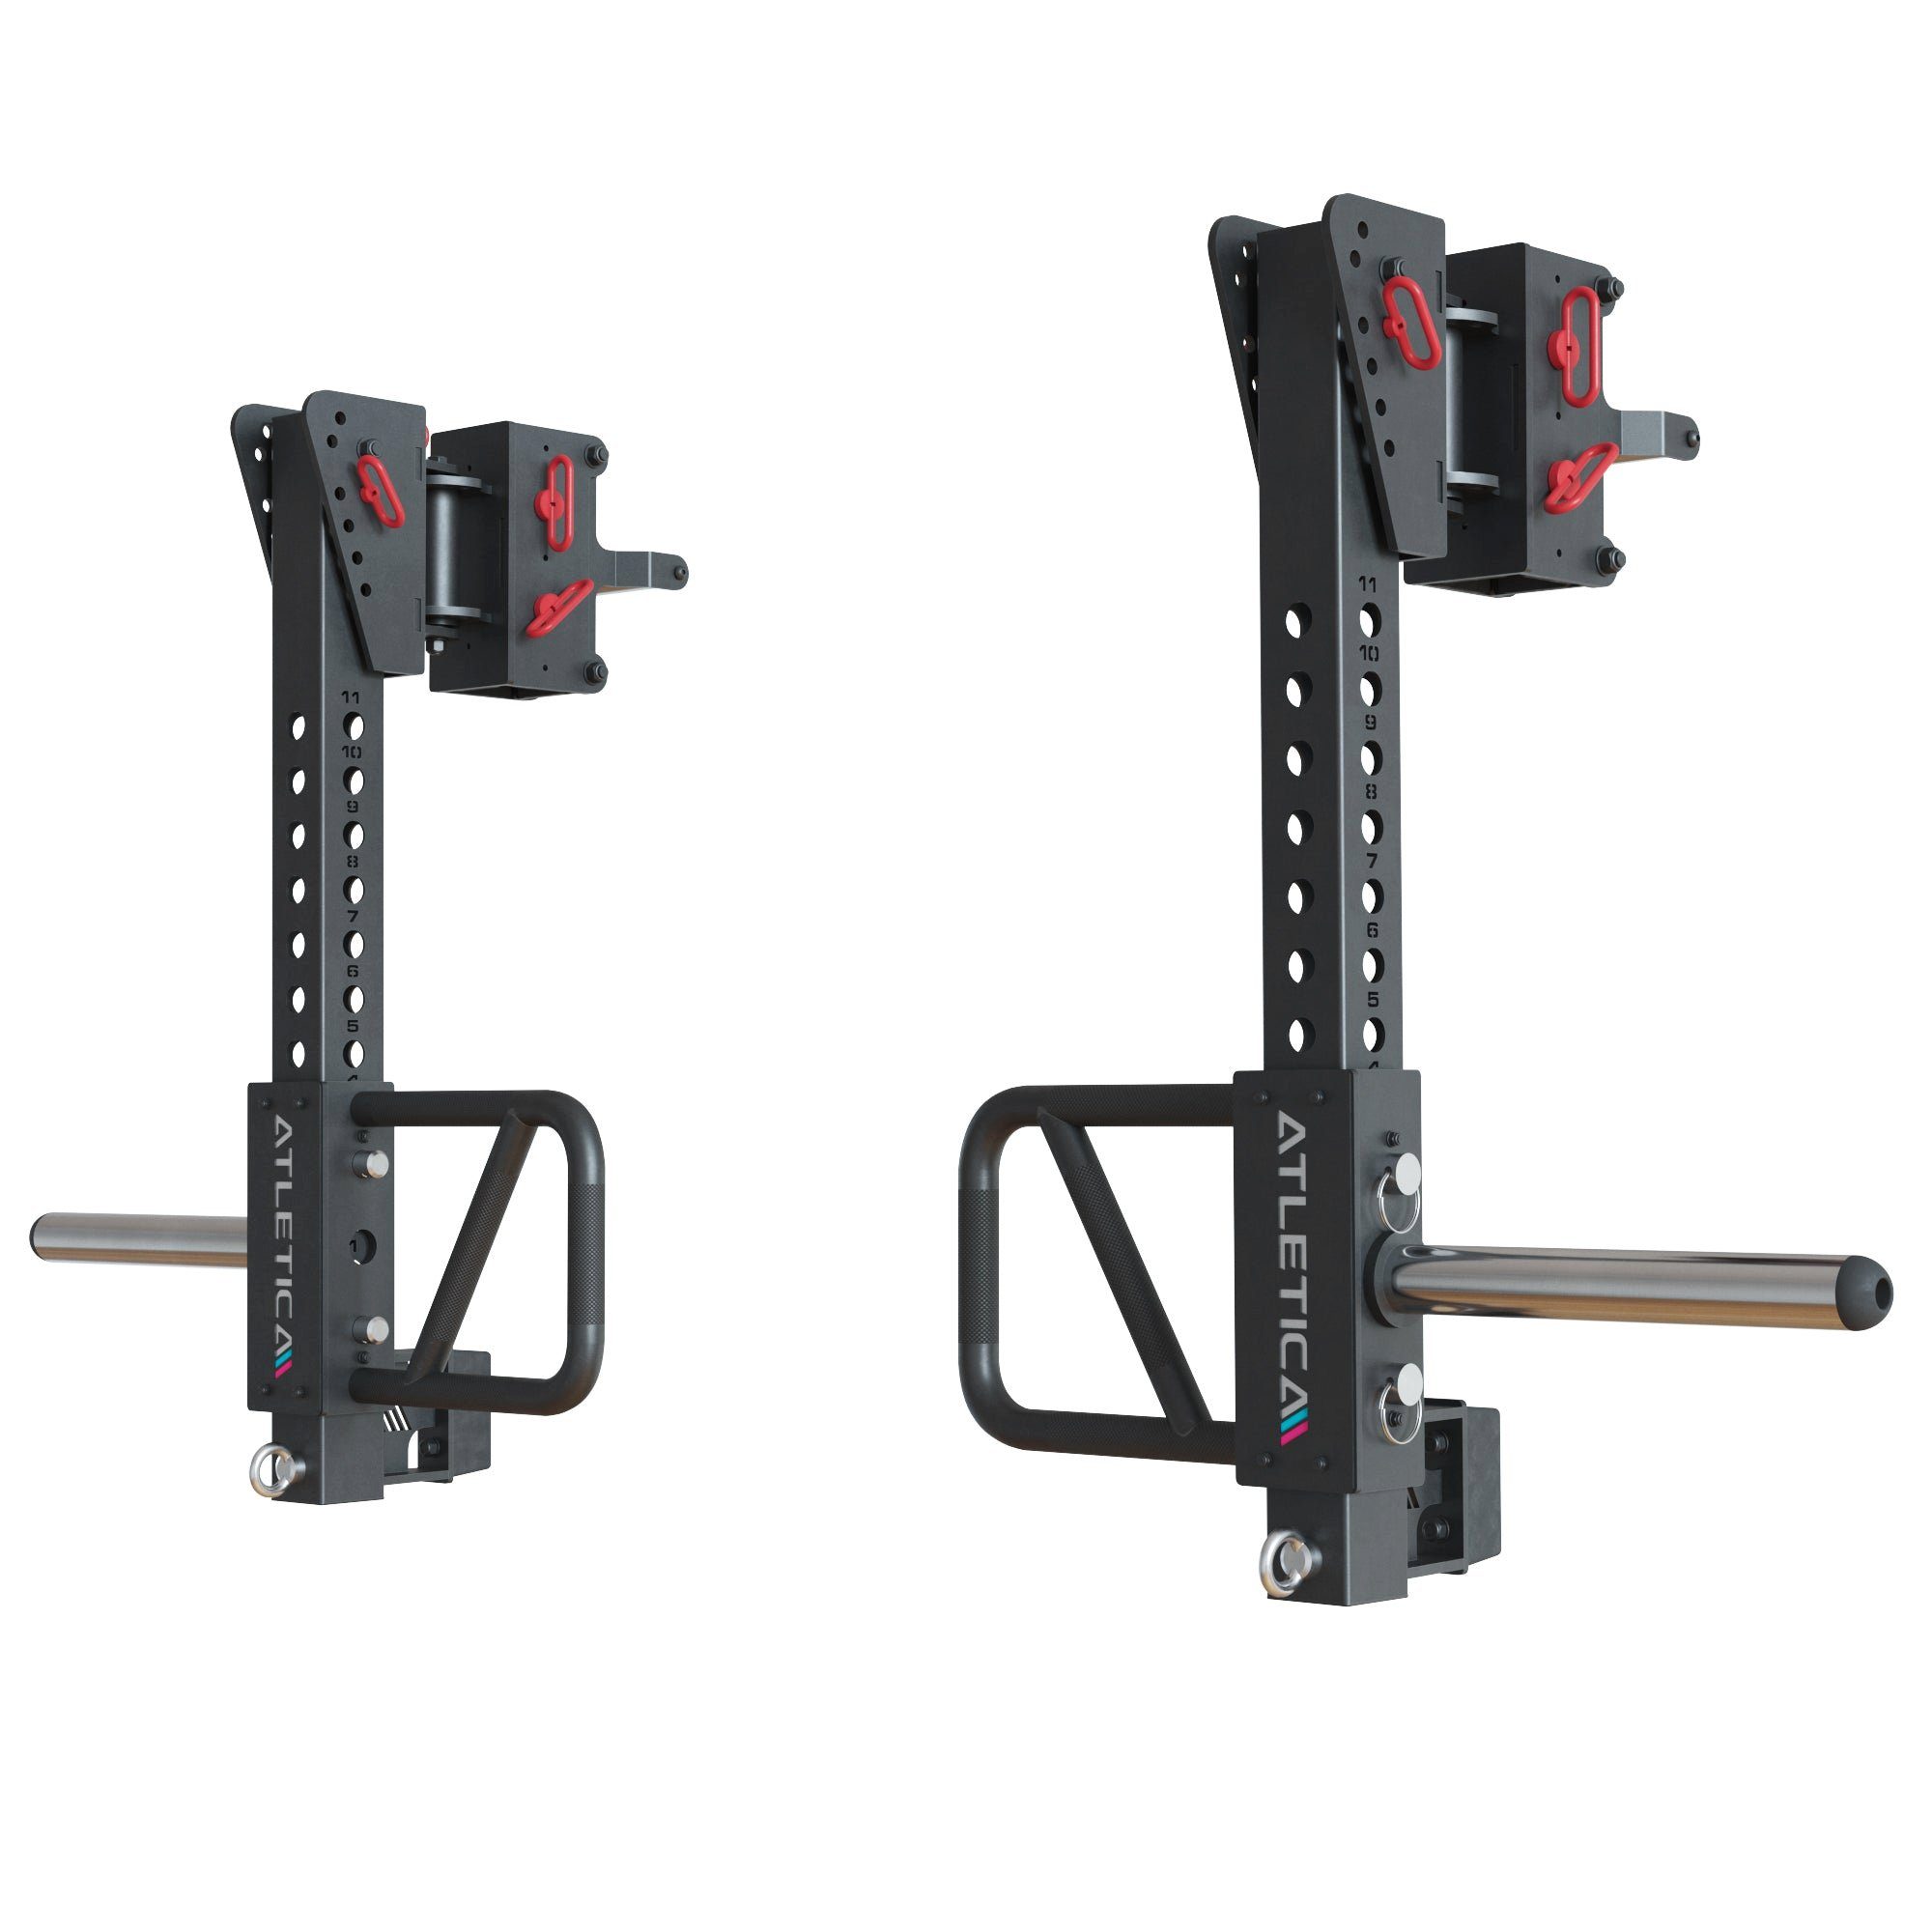 54 Power Rack 75x75x3 cm kg, Arms, R8-Jammer Stahlprofil, ATLETICA 110 mm